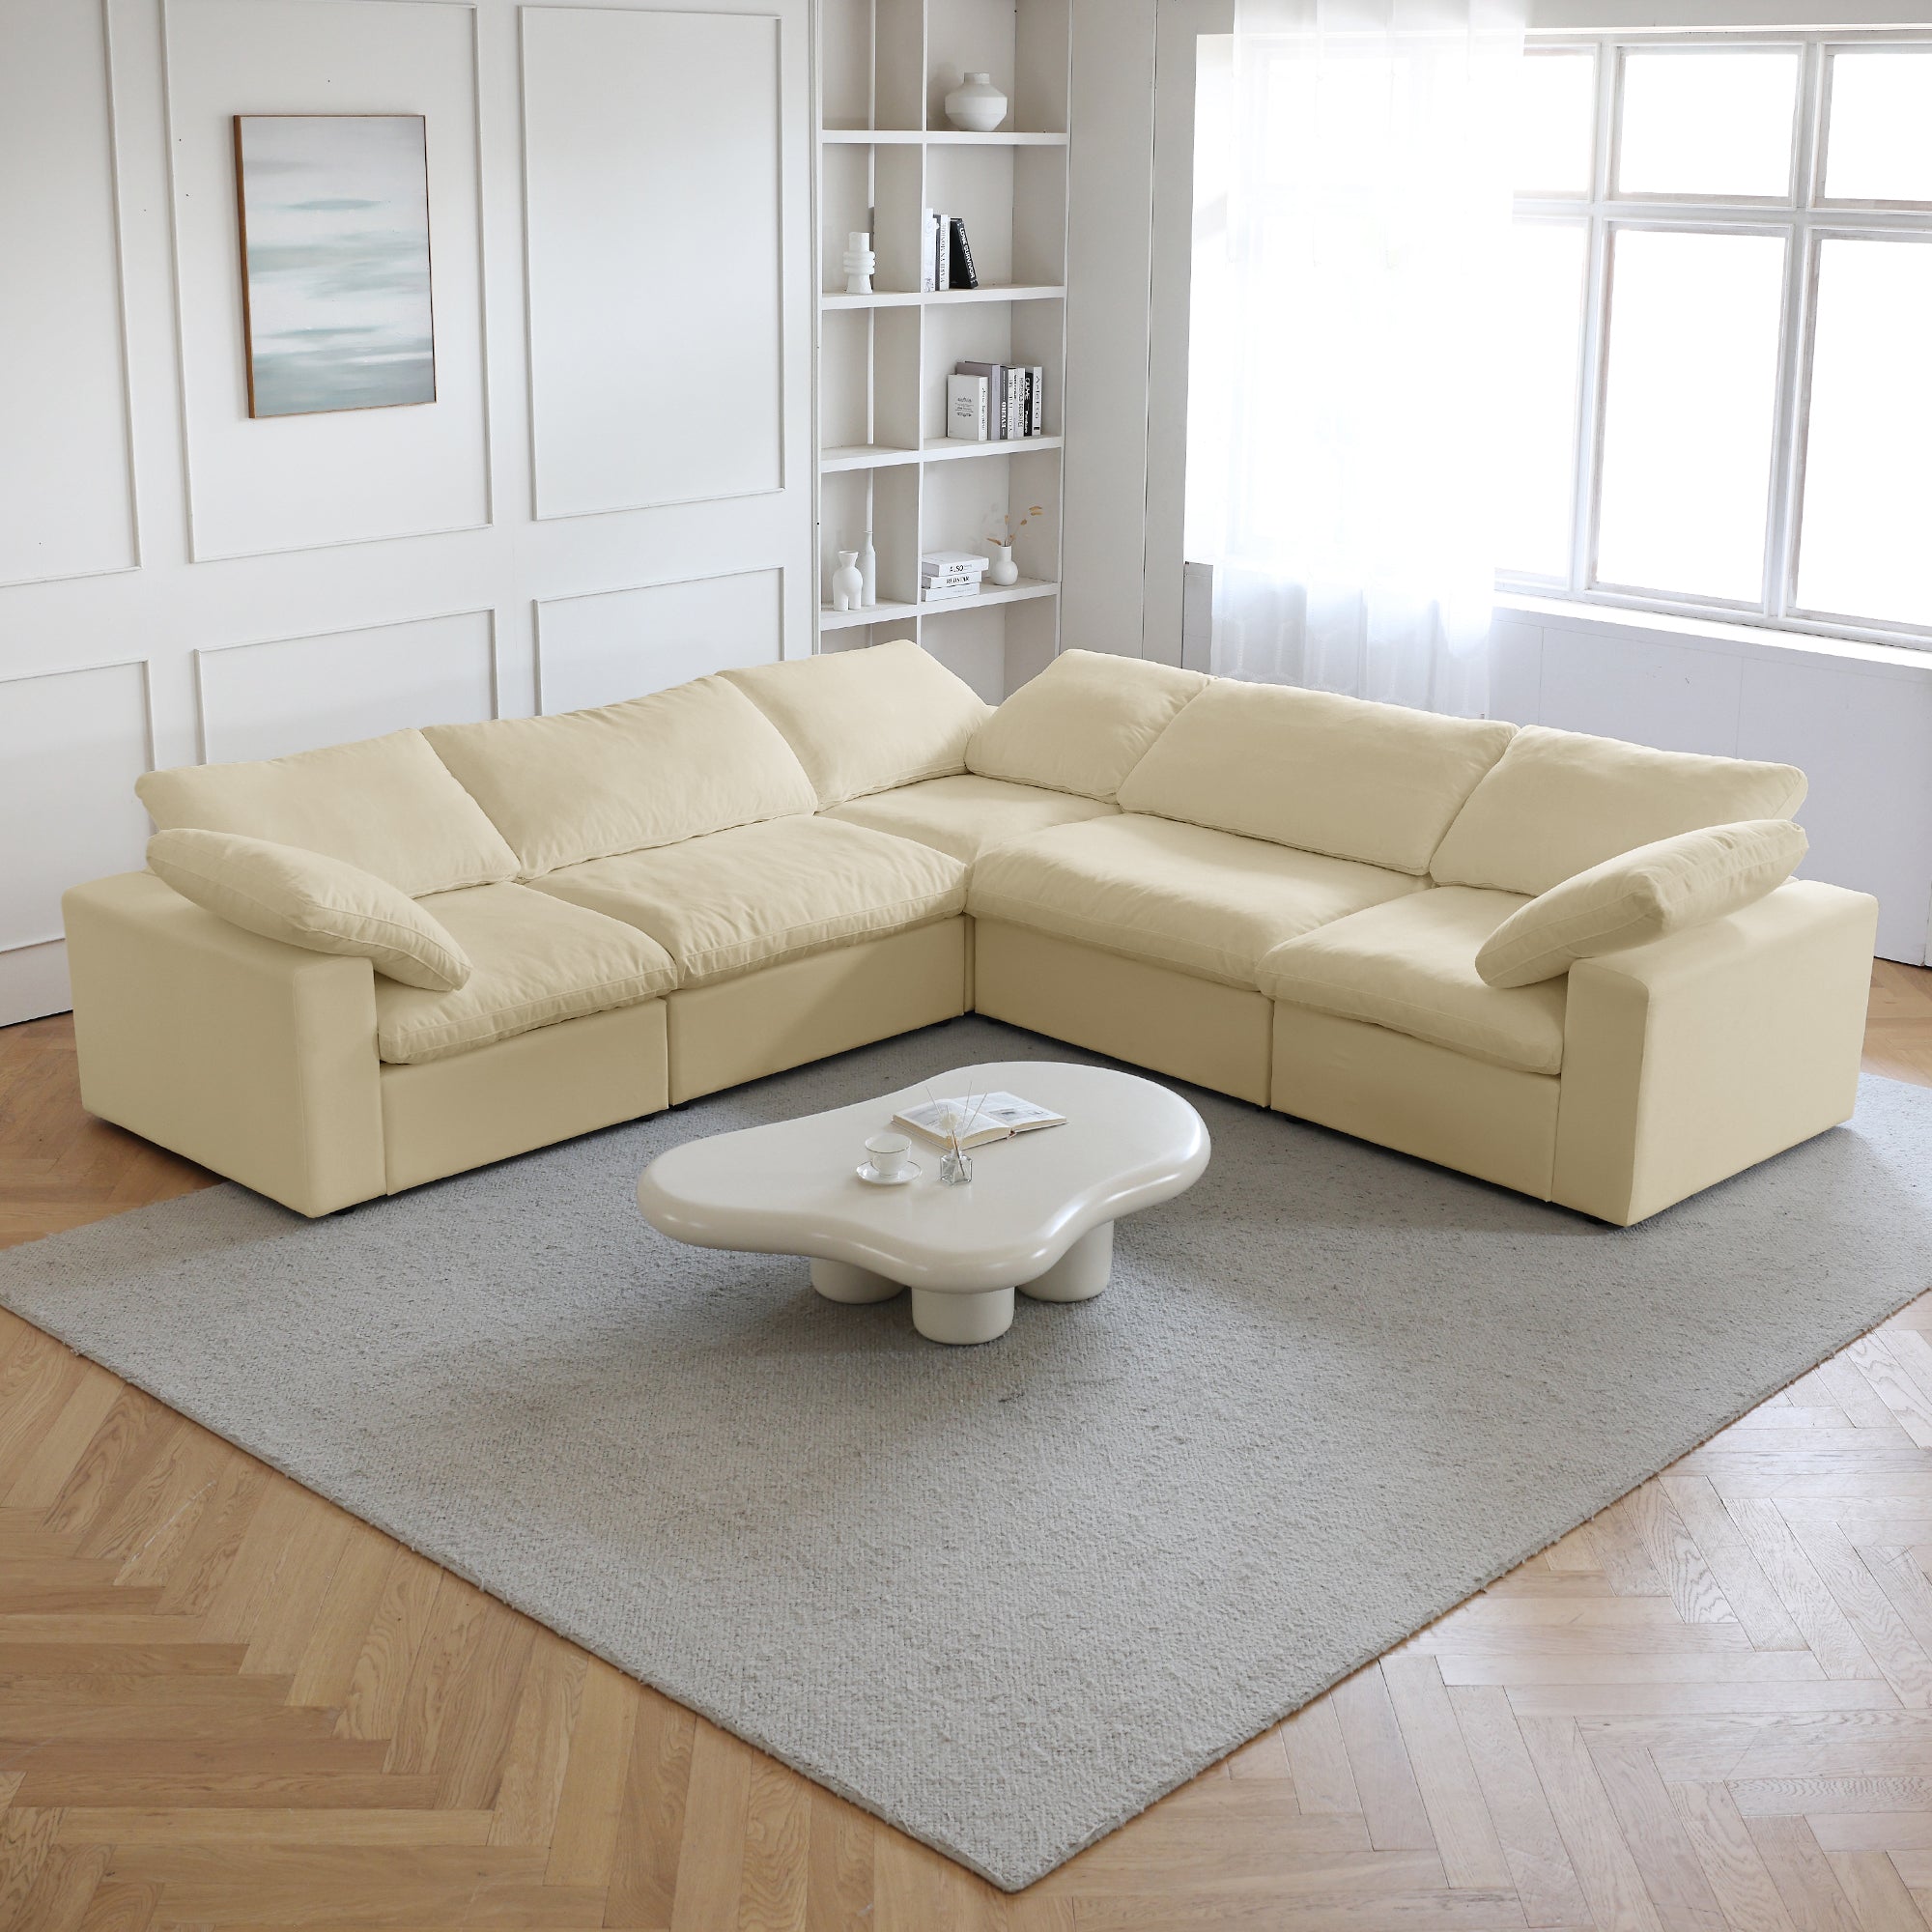 The Core Serenity Couch